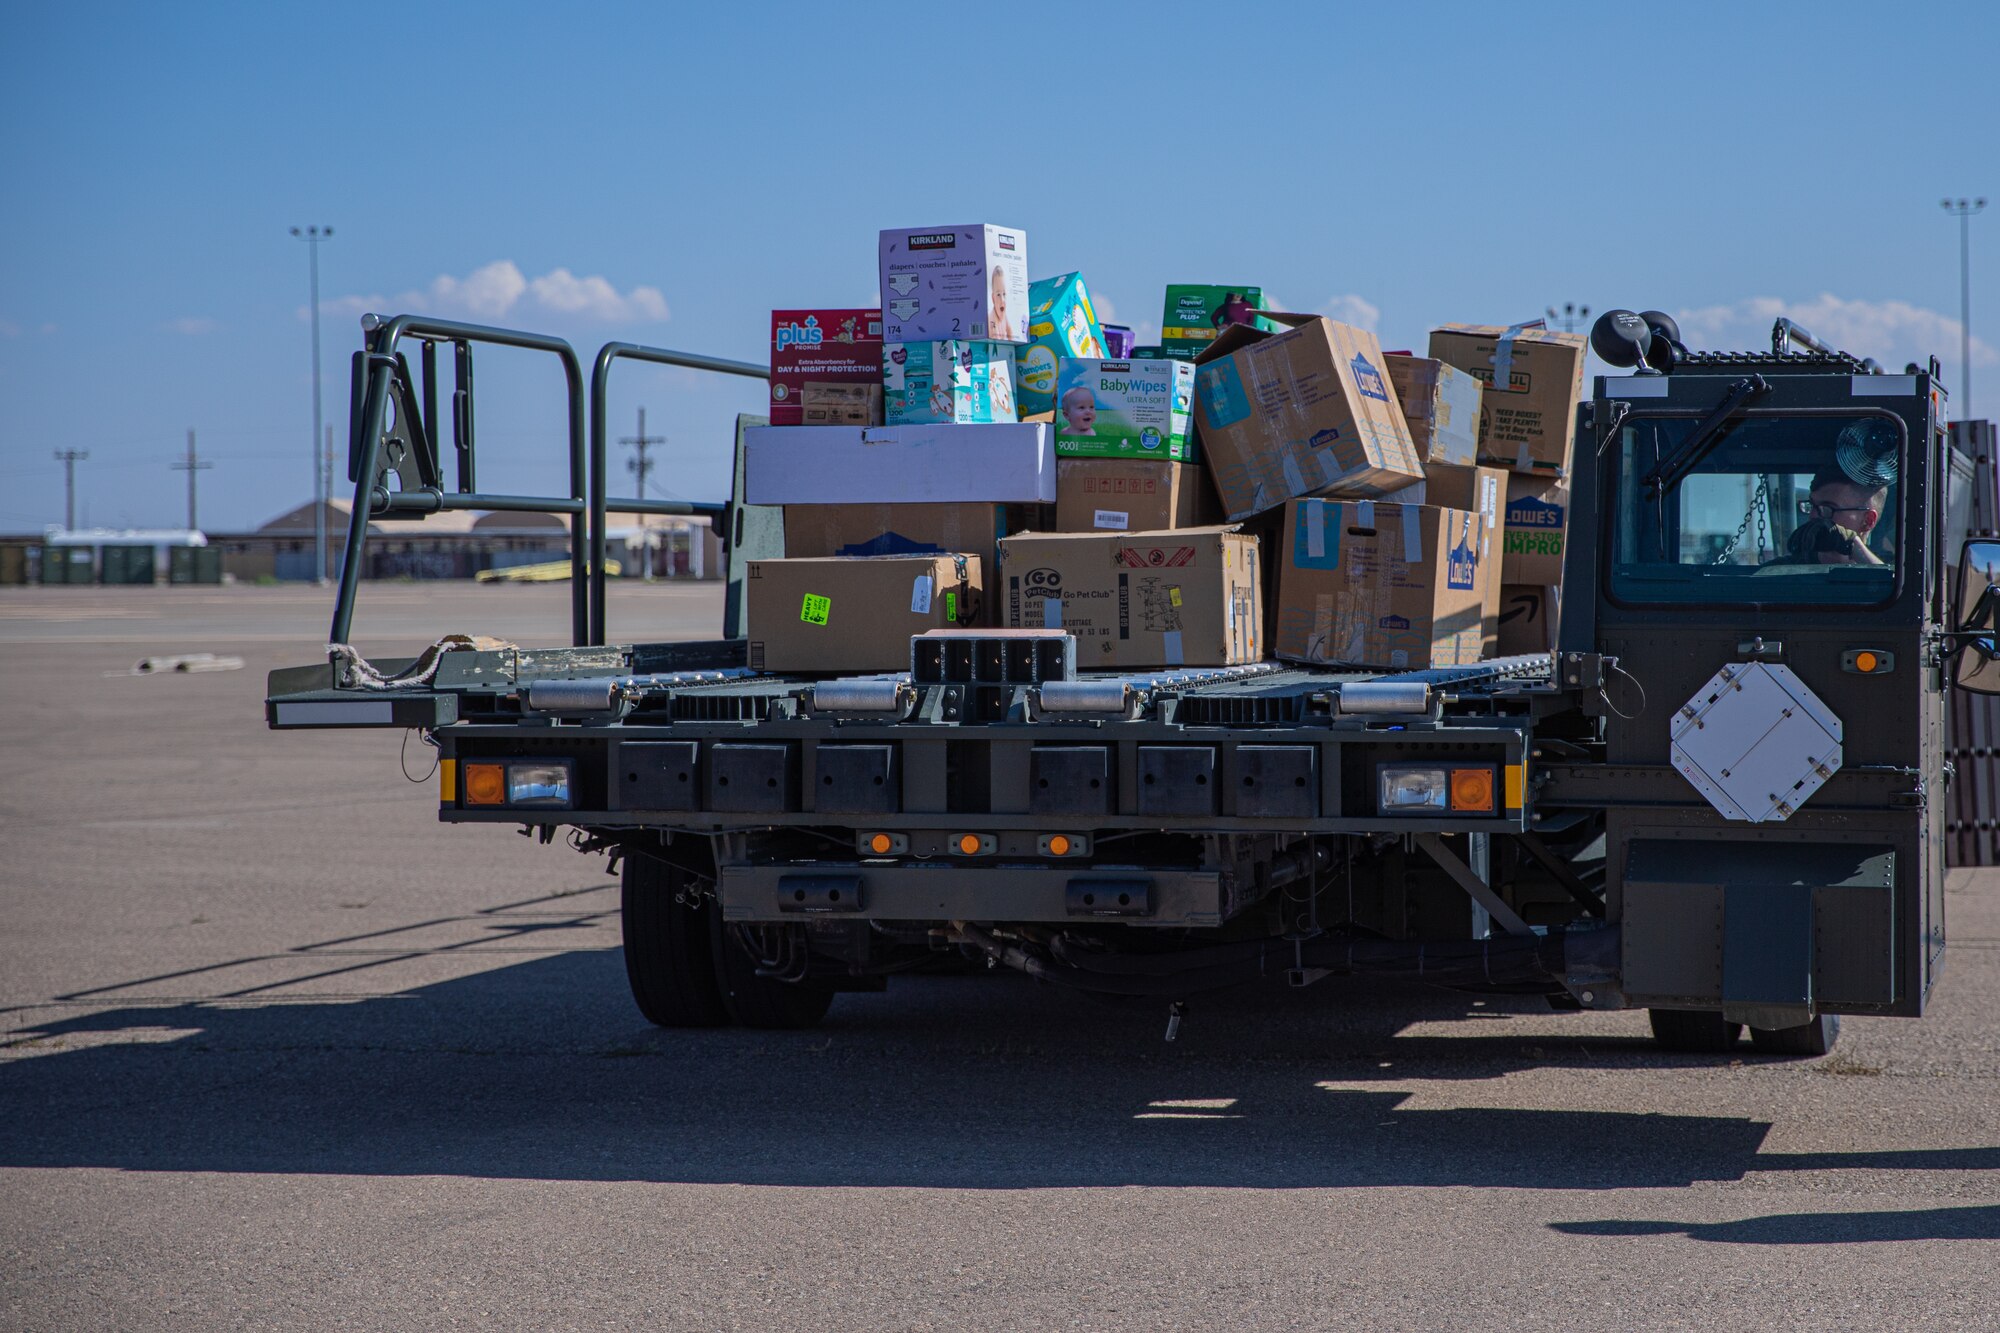 An Airman attached to Task Force-Holloman transports donations in support of Operation Allies Welcome on Holloman Air Force Base, New Mexico, Sept. 17, 2021. The Department of Defense, through U.S. Northern Command, and in support of the Department of State and Department of Homeland Security, is providing transportation, temporary housing, medical screening, and general support for at least 50,000 Afghan evacuees at suitable facilities, in permanent or temporary structures, as quickly as possible. This initiative provides Afghan evacuees essential support at secure locations outside Afghanistan. (U.S. Army photo by Pfc. Anthony Sanchez)